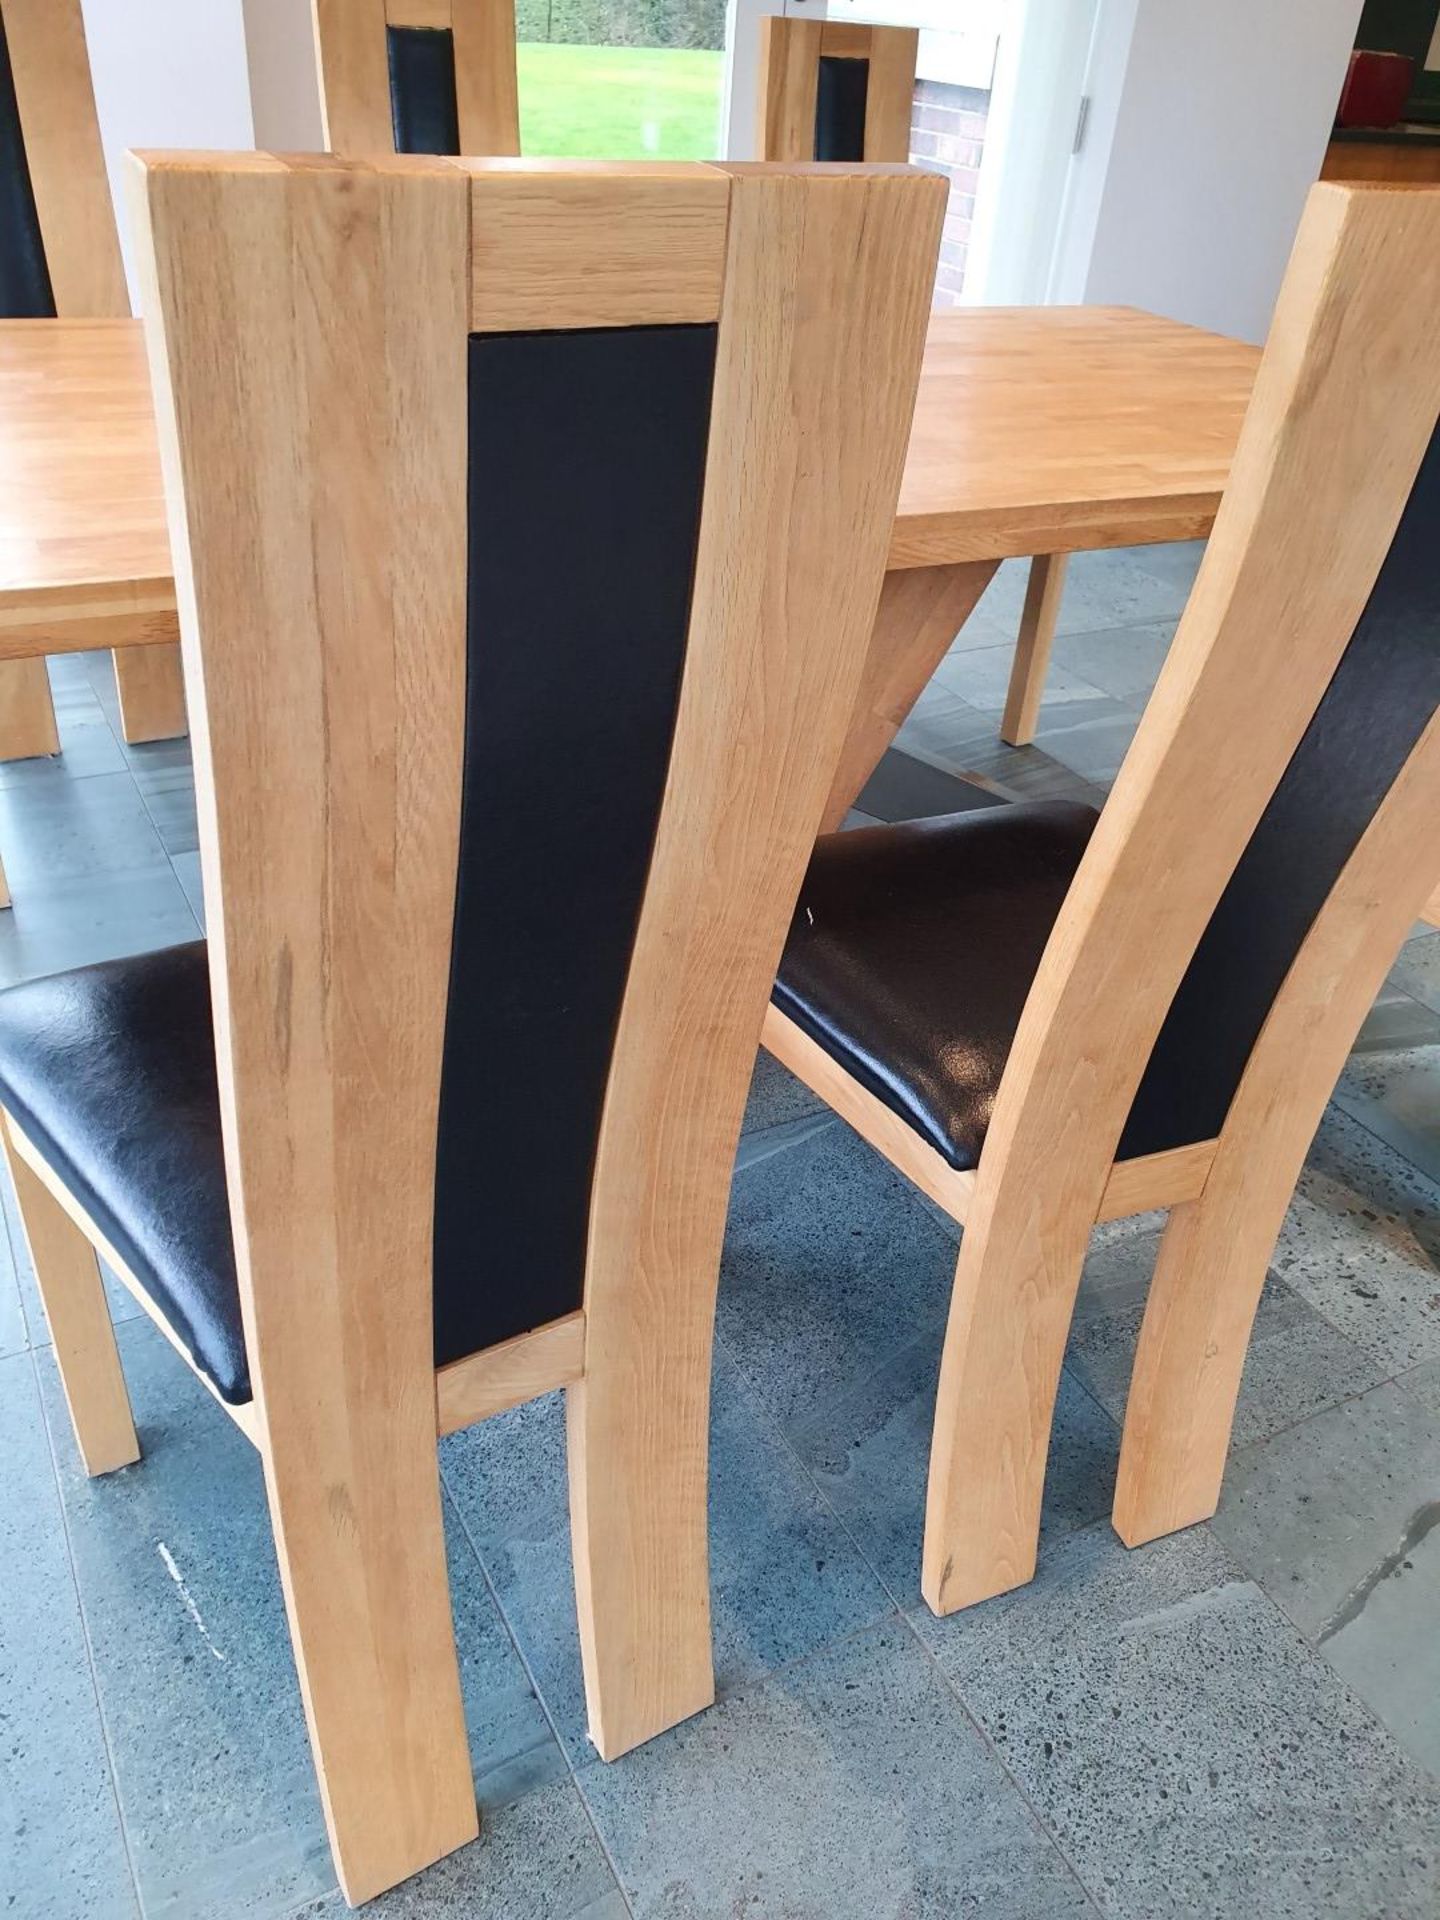 1 x Solid Oak 1.8 Metre Dining Table With 6 x High Back Dining Chairs - Pre-owned In Great Condition - Image 4 of 12